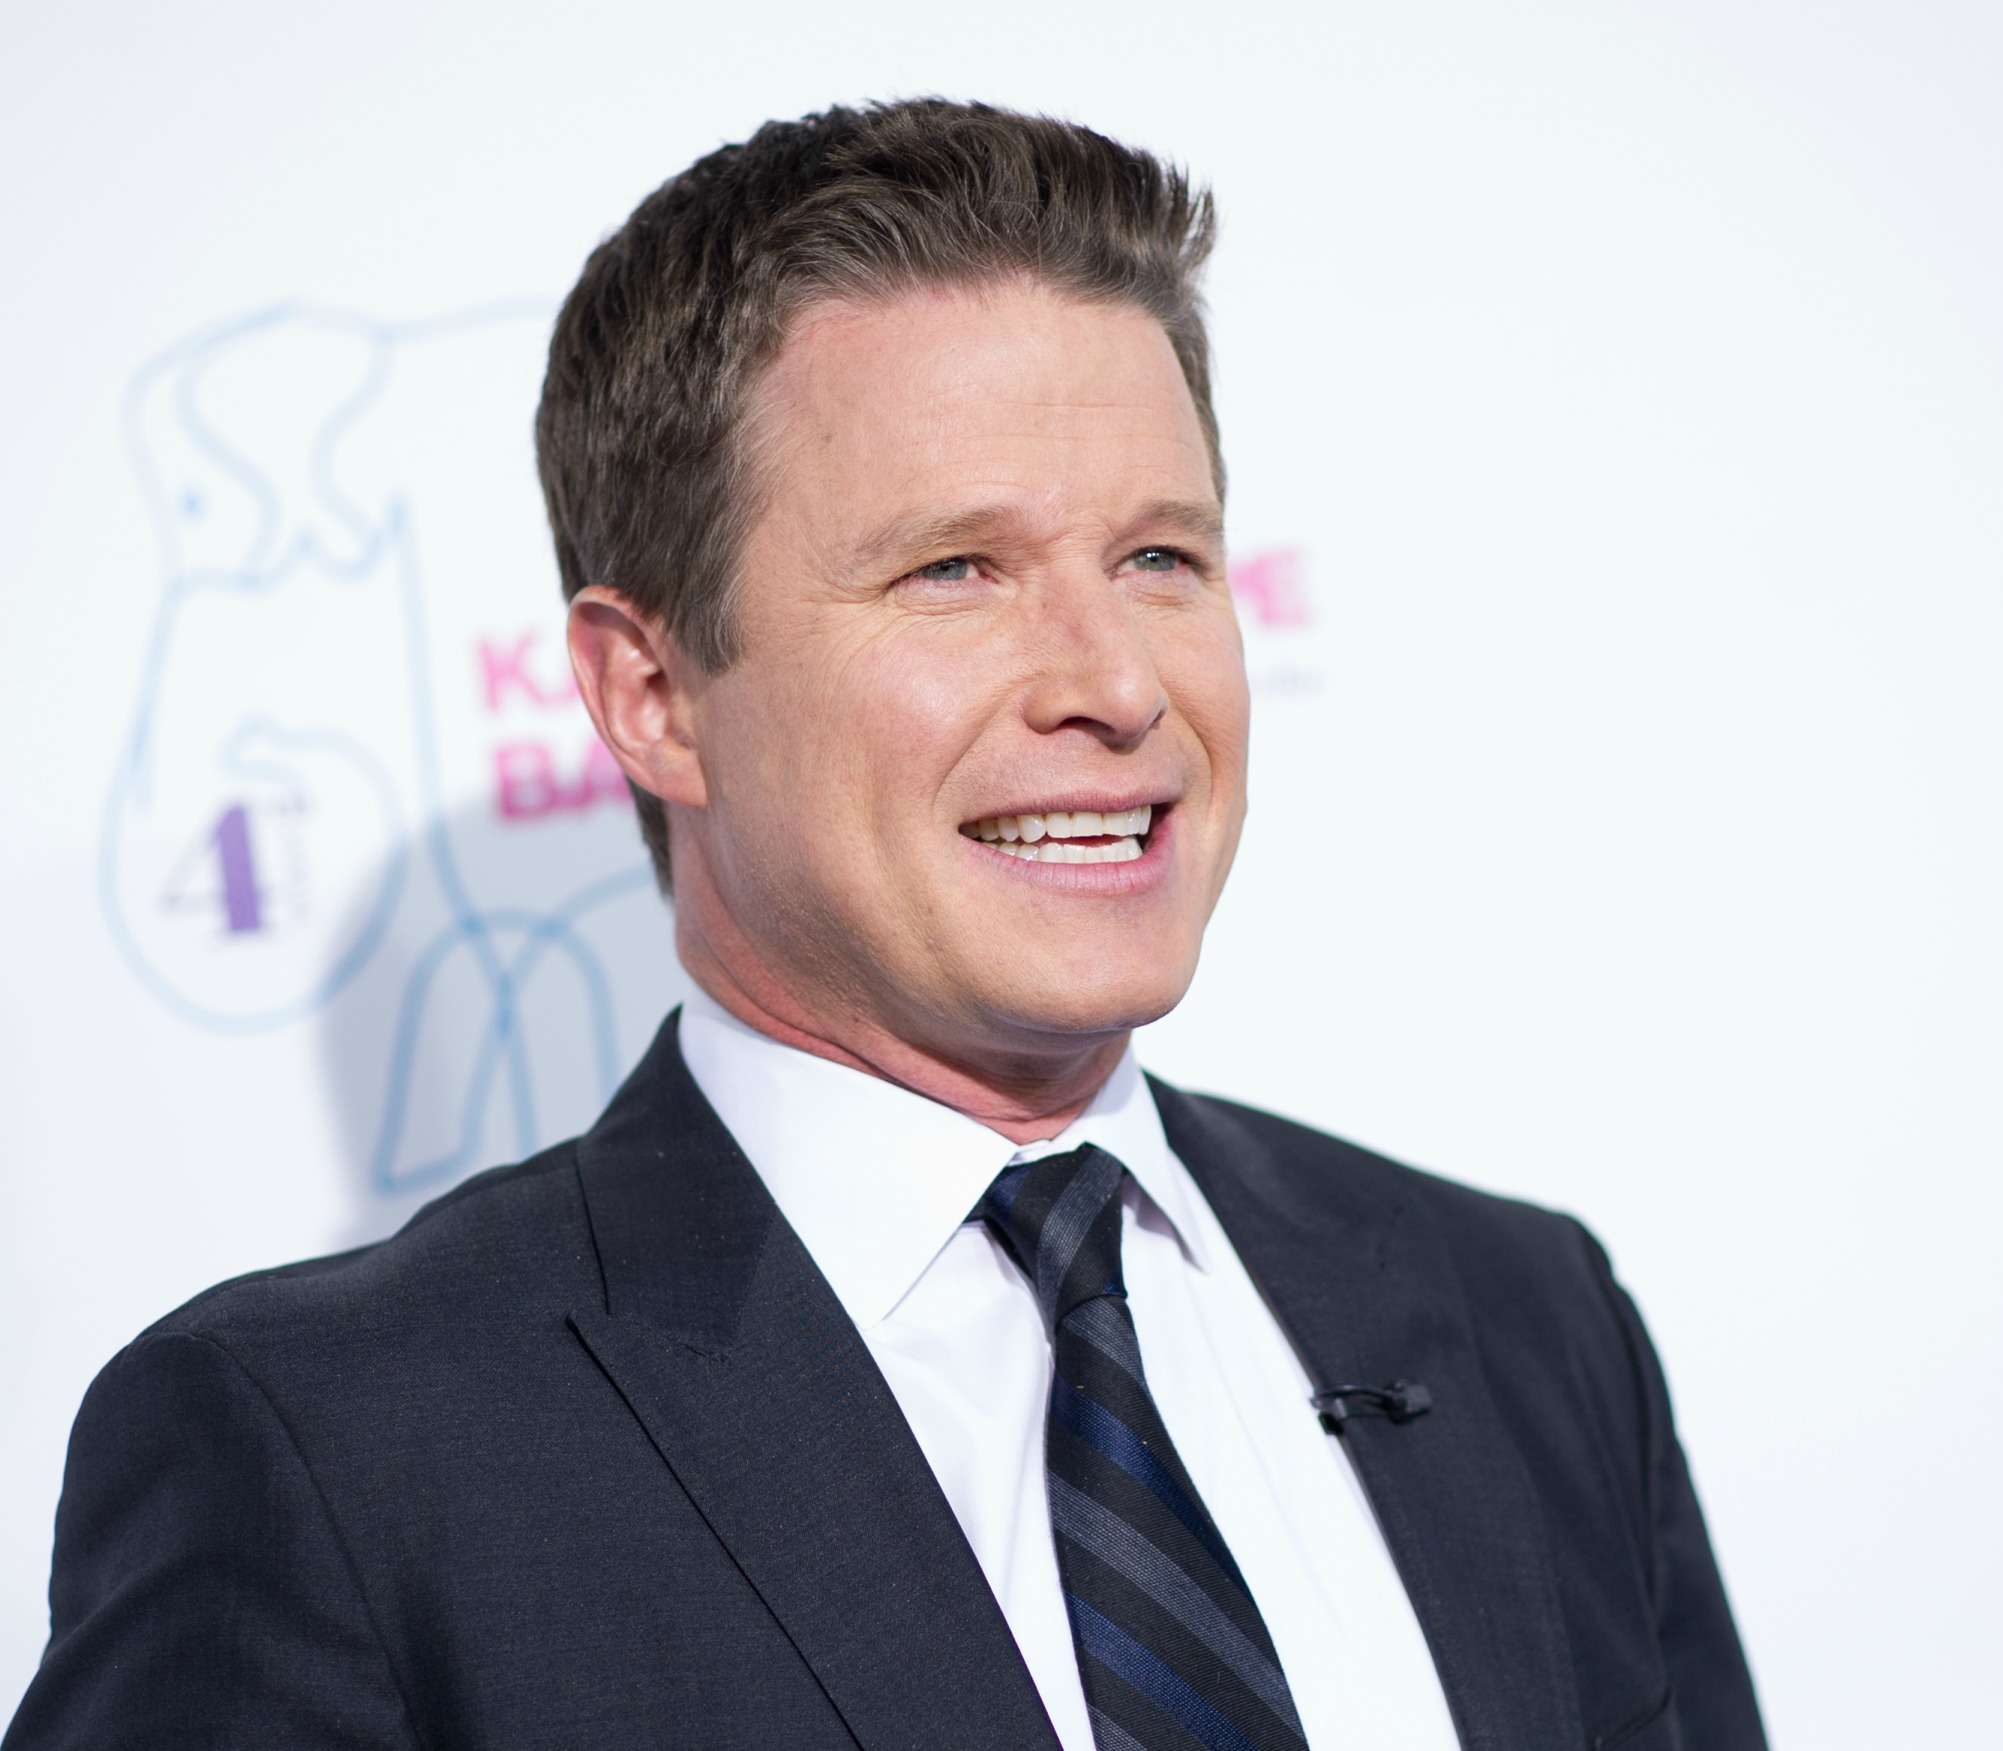 LISTEN: Billy Bush has spoken about the infamous pussy grabbing tape.